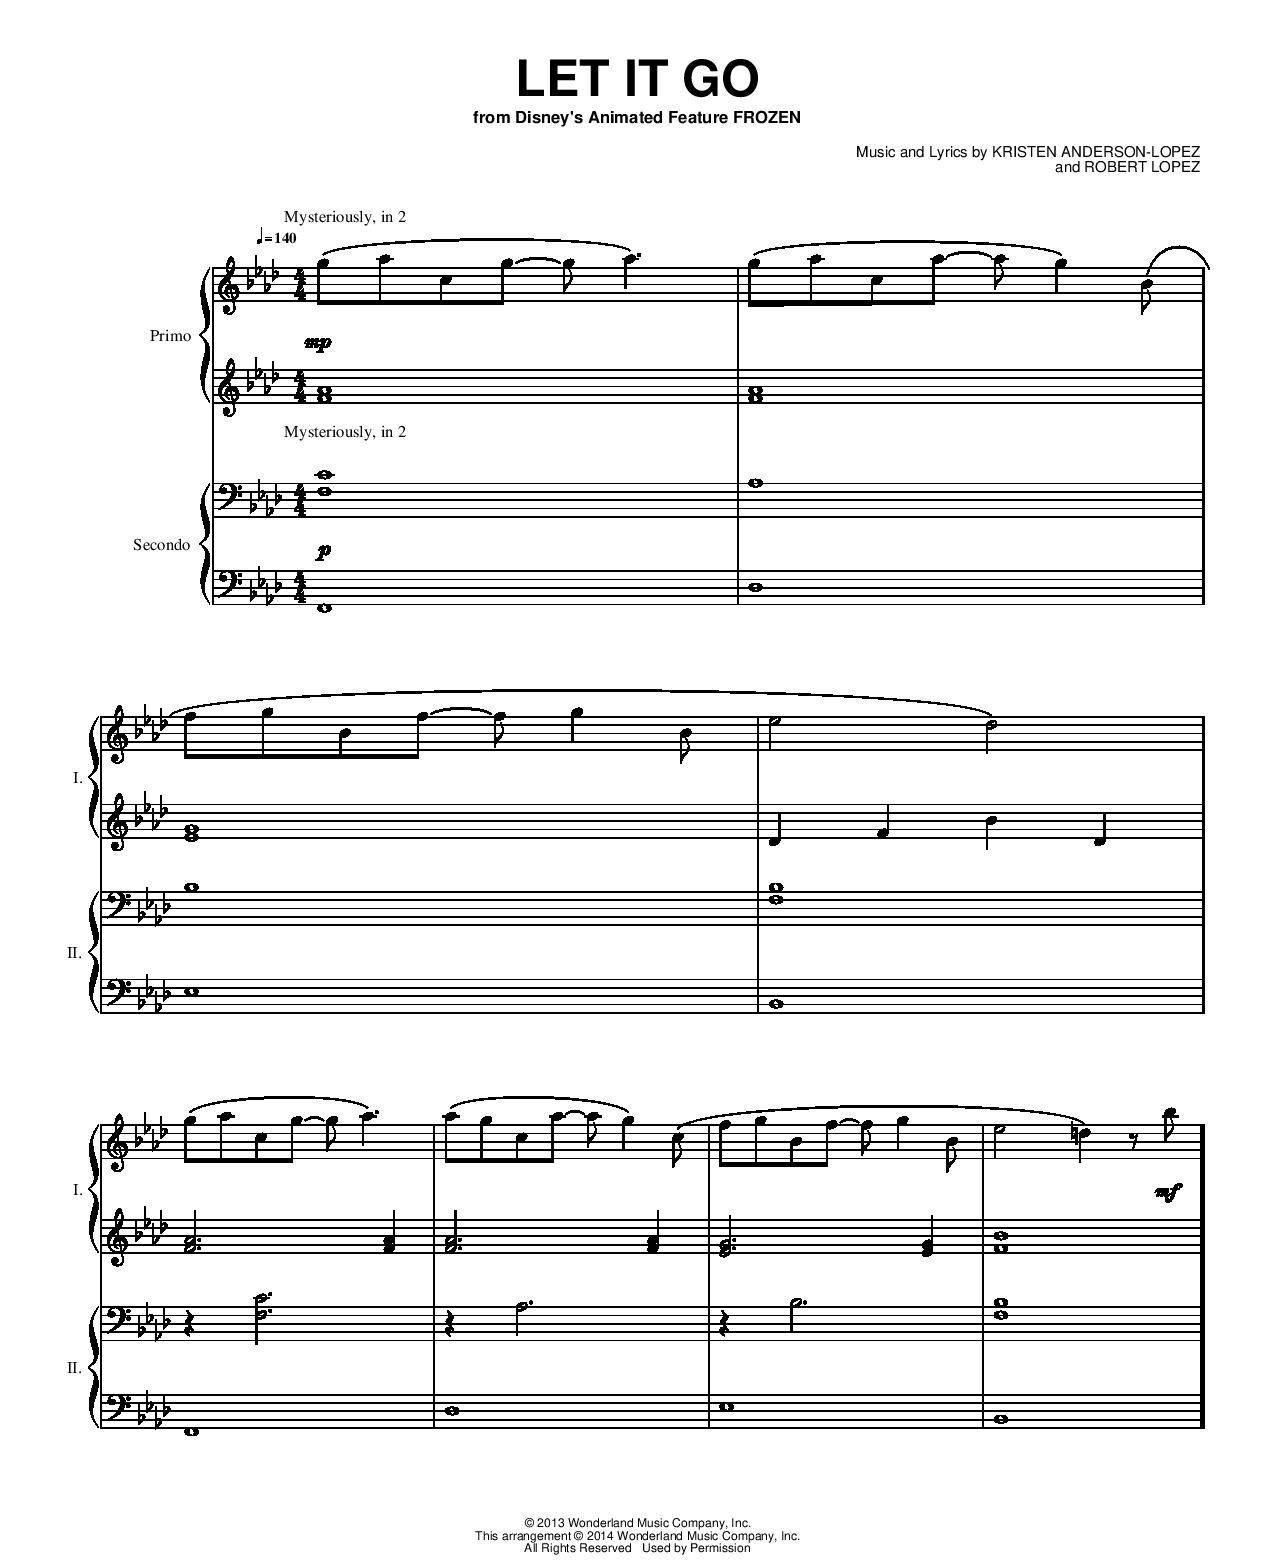 Sheet music for "Let It Go" as a piano duet.